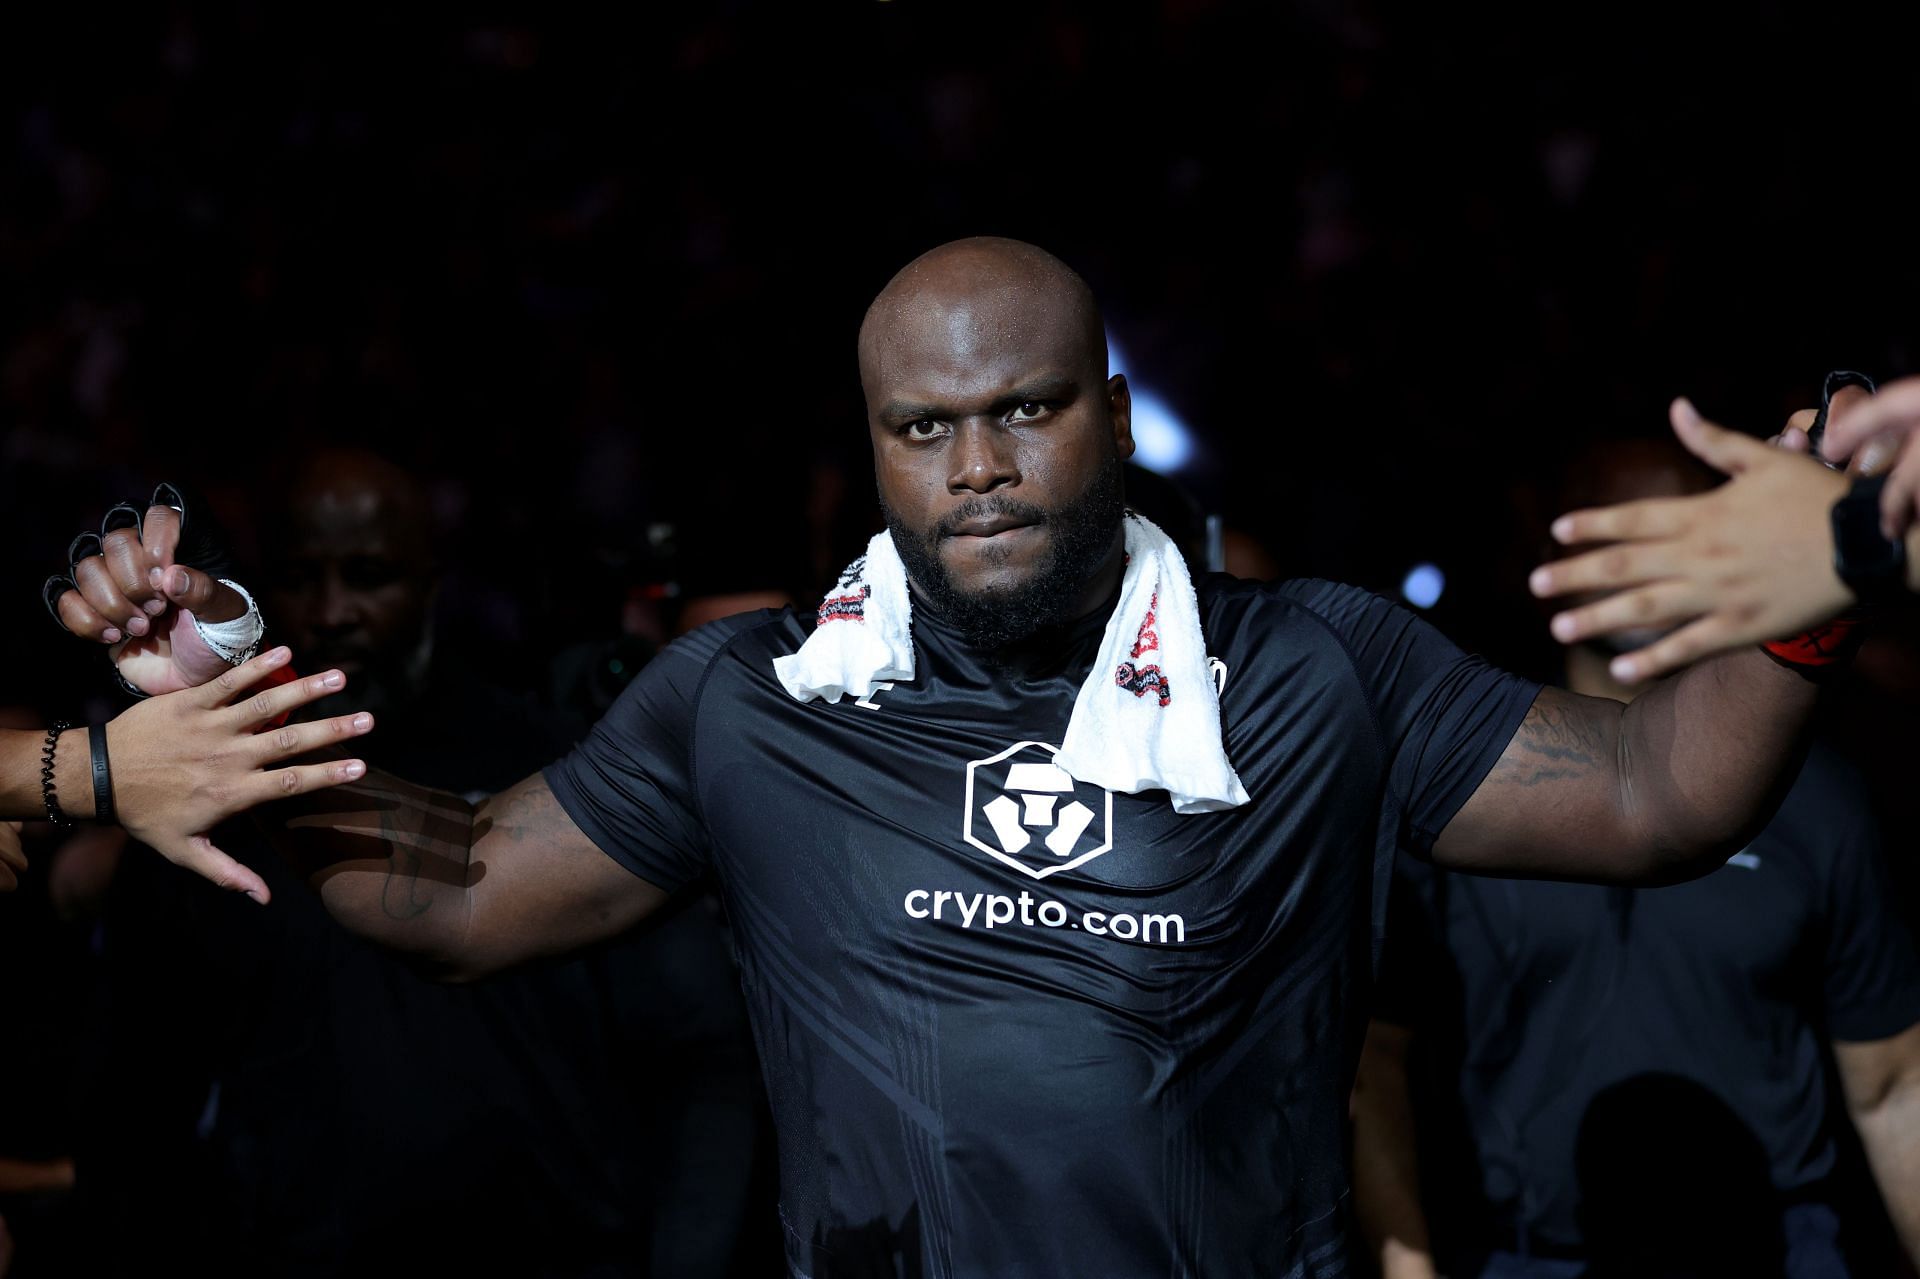 Derrick Lewis looked to be back to his best last night